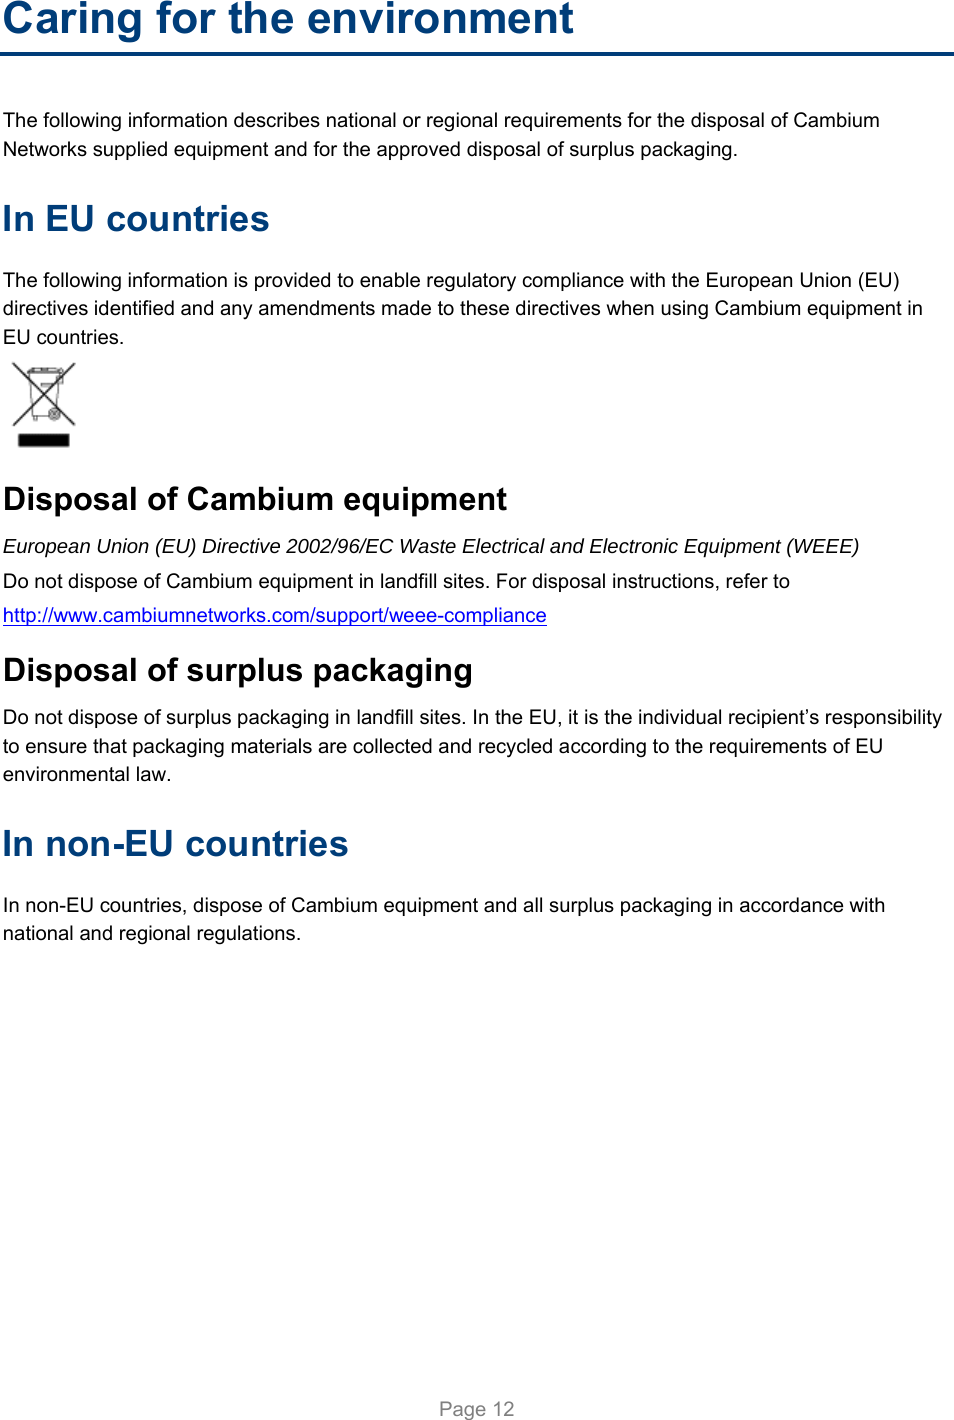   Page 12 Caring for the environment The following information describes national or regional requirements for the disposal of Cambium Networks supplied equipment and for the approved disposal of surplus packaging. In EU countries The following information is provided to enable regulatory compliance with the European Union (EU) directives identified and any amendments made to these directives when using Cambium equipment in EU countries.  Disposal of Cambium equipment European Union (EU) Directive 2002/96/EC Waste Electrical and Electronic Equipment (WEEE) Do not dispose of Cambium equipment in landfill sites. For disposal instructions, refer to  http://www.cambiumnetworks.com/support/weee-compliance Disposal of surplus packaging Do not dispose of surplus packaging in landfill sites. In the EU, it is the individual recipient’s responsibility to ensure that packaging materials are collected and recycled according to the requirements of EU environmental law. In non-EU countries In non-EU countries, dispose of Cambium equipment and all surplus packaging in accordance with national and regional regulations.  